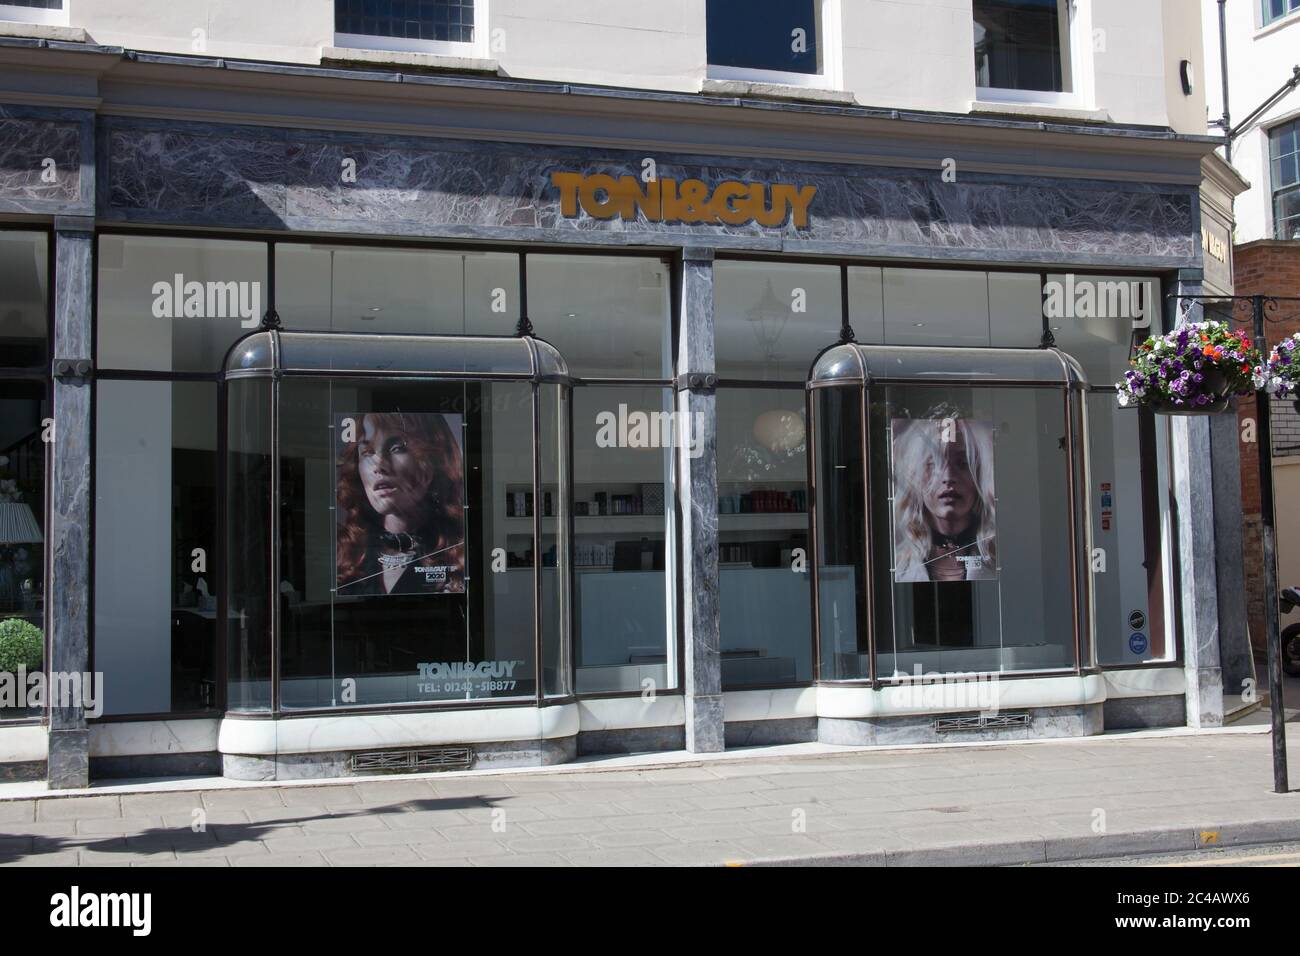 The Toni and Guy hairdressing salon in Cheltenham, Gloucestershire in the UK Stock Photo